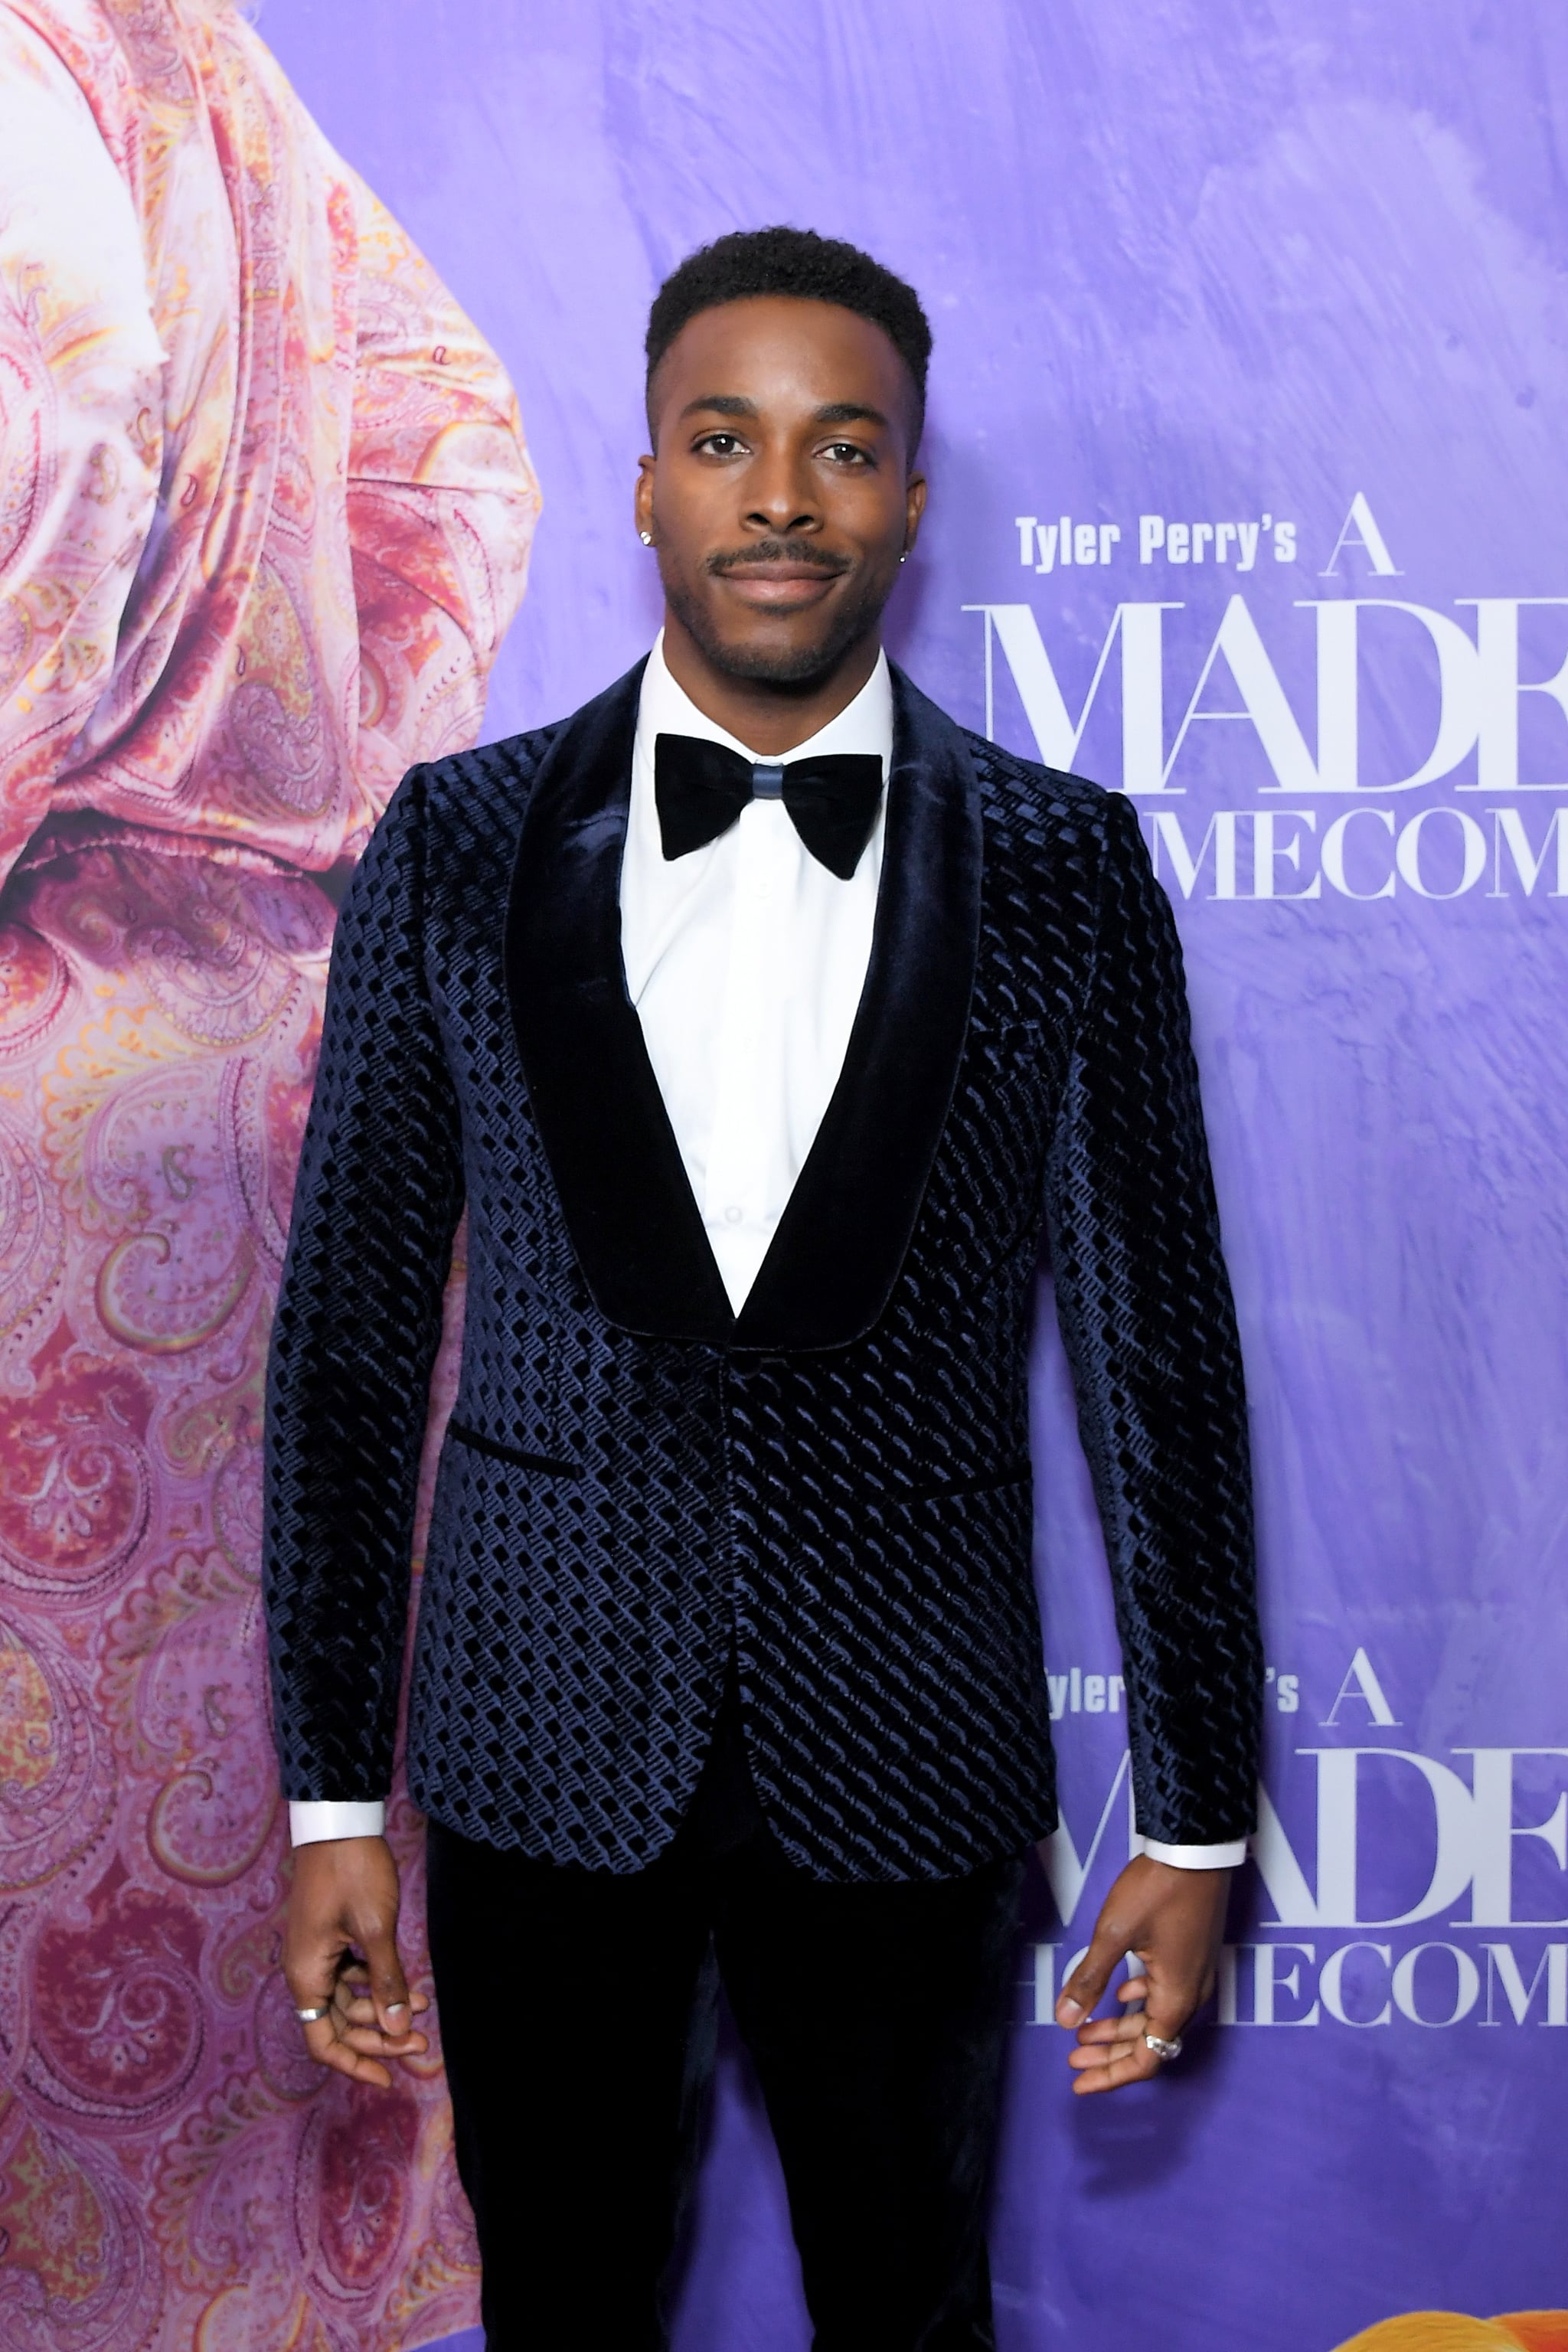 LOS ANGELES, CALIFORNIA - FEBRUARY 22: Brandon Black attends Tyler Perry's 'A Madea Homecoming' Premiere on February 22, 2022 in Los Angeles, California. (Photo by Charley Gallay/Getty Images for Netflix)